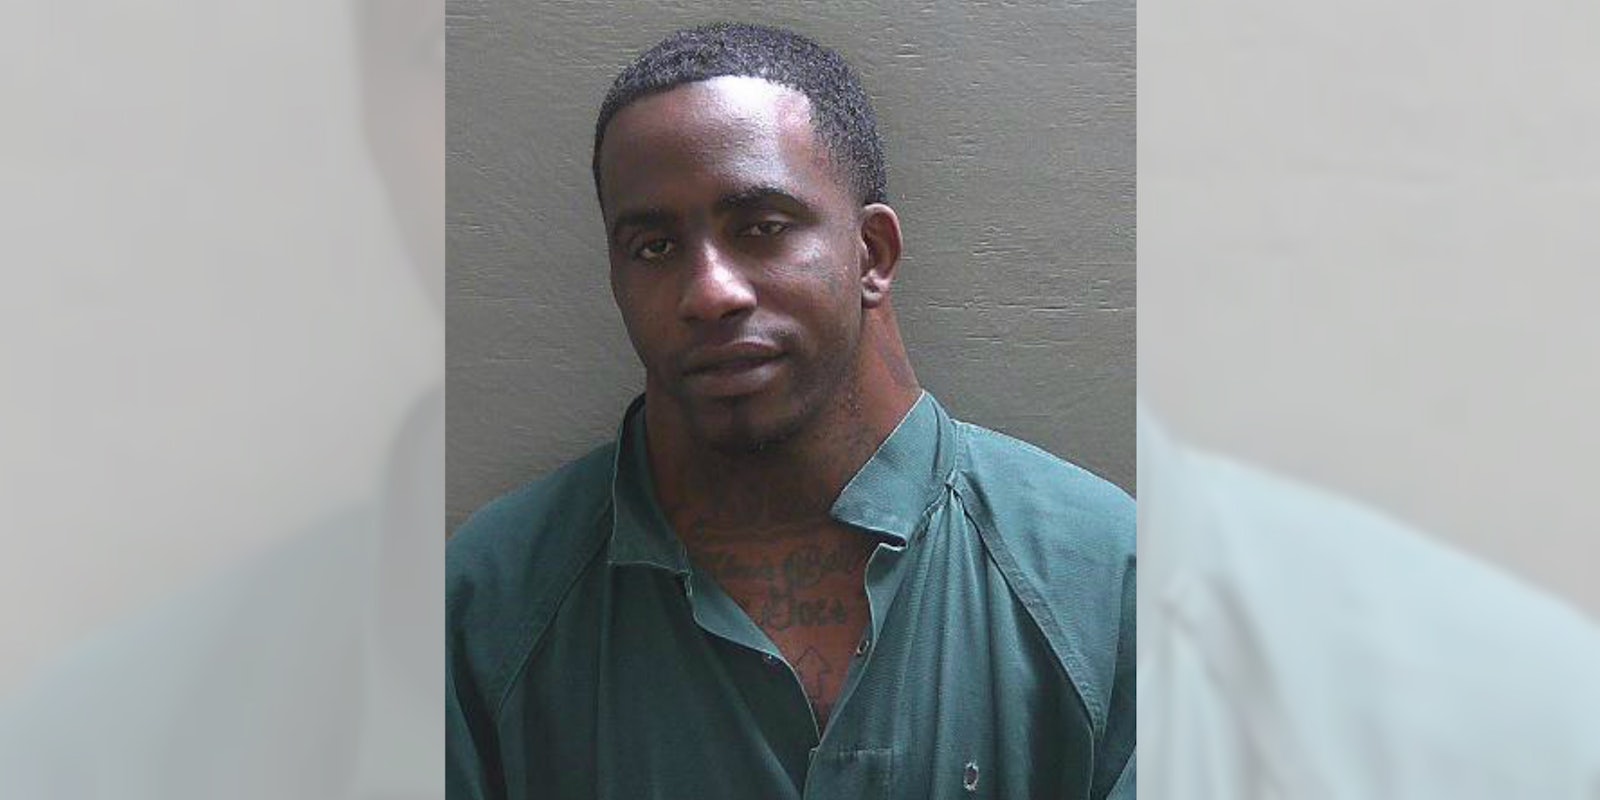 Charles 'Wide Neck' Dion McDowell was arrested in Pensacola, Florida, after a judge revoked his bond.